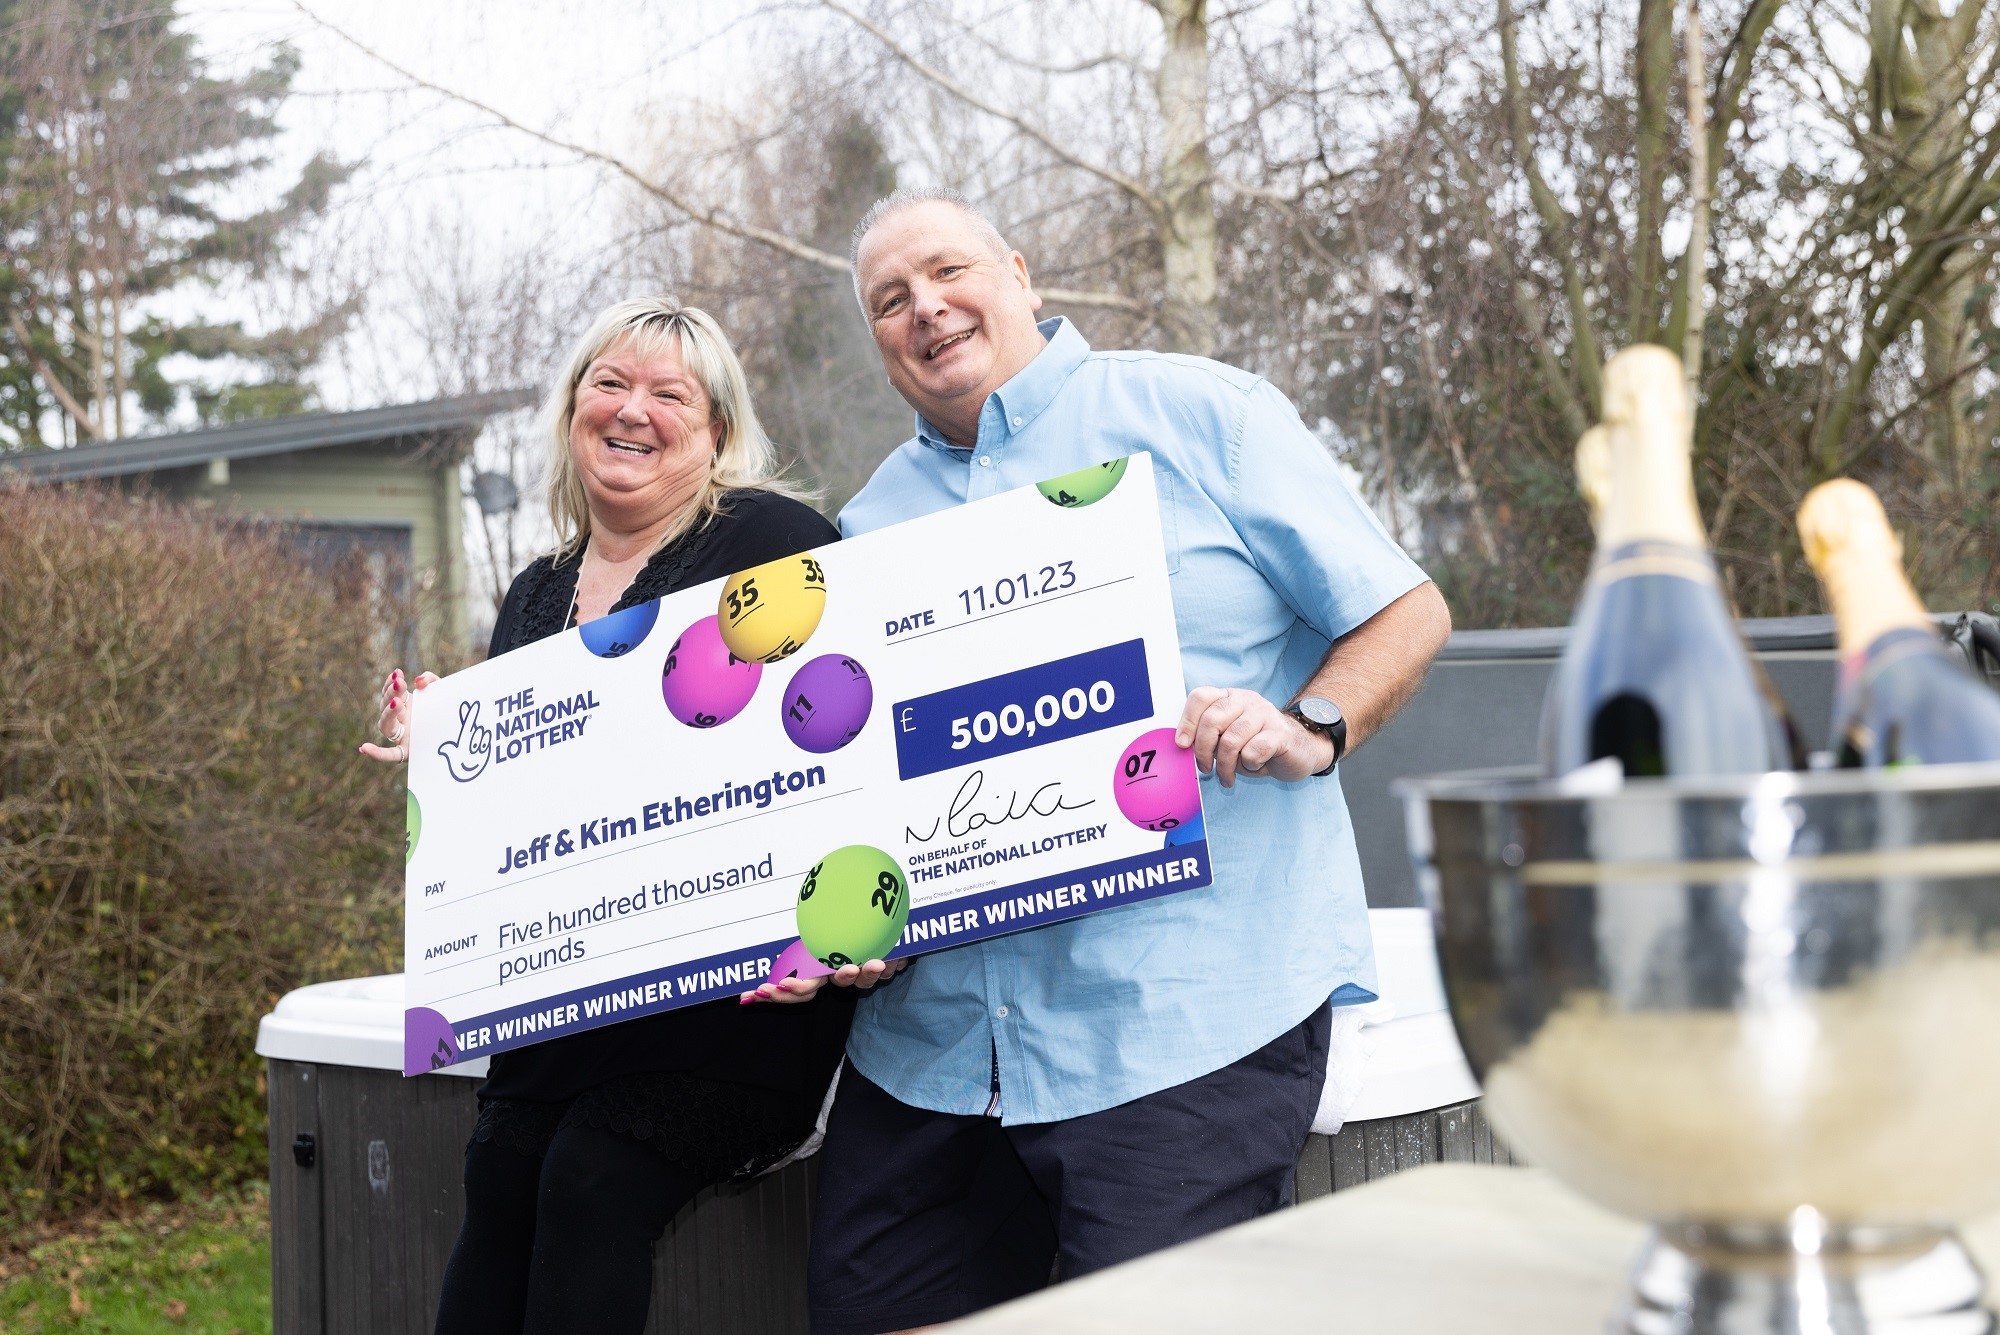 Mr Etherington bought his winning ticket after swapping to an early shift. (National Lottery/ PA)